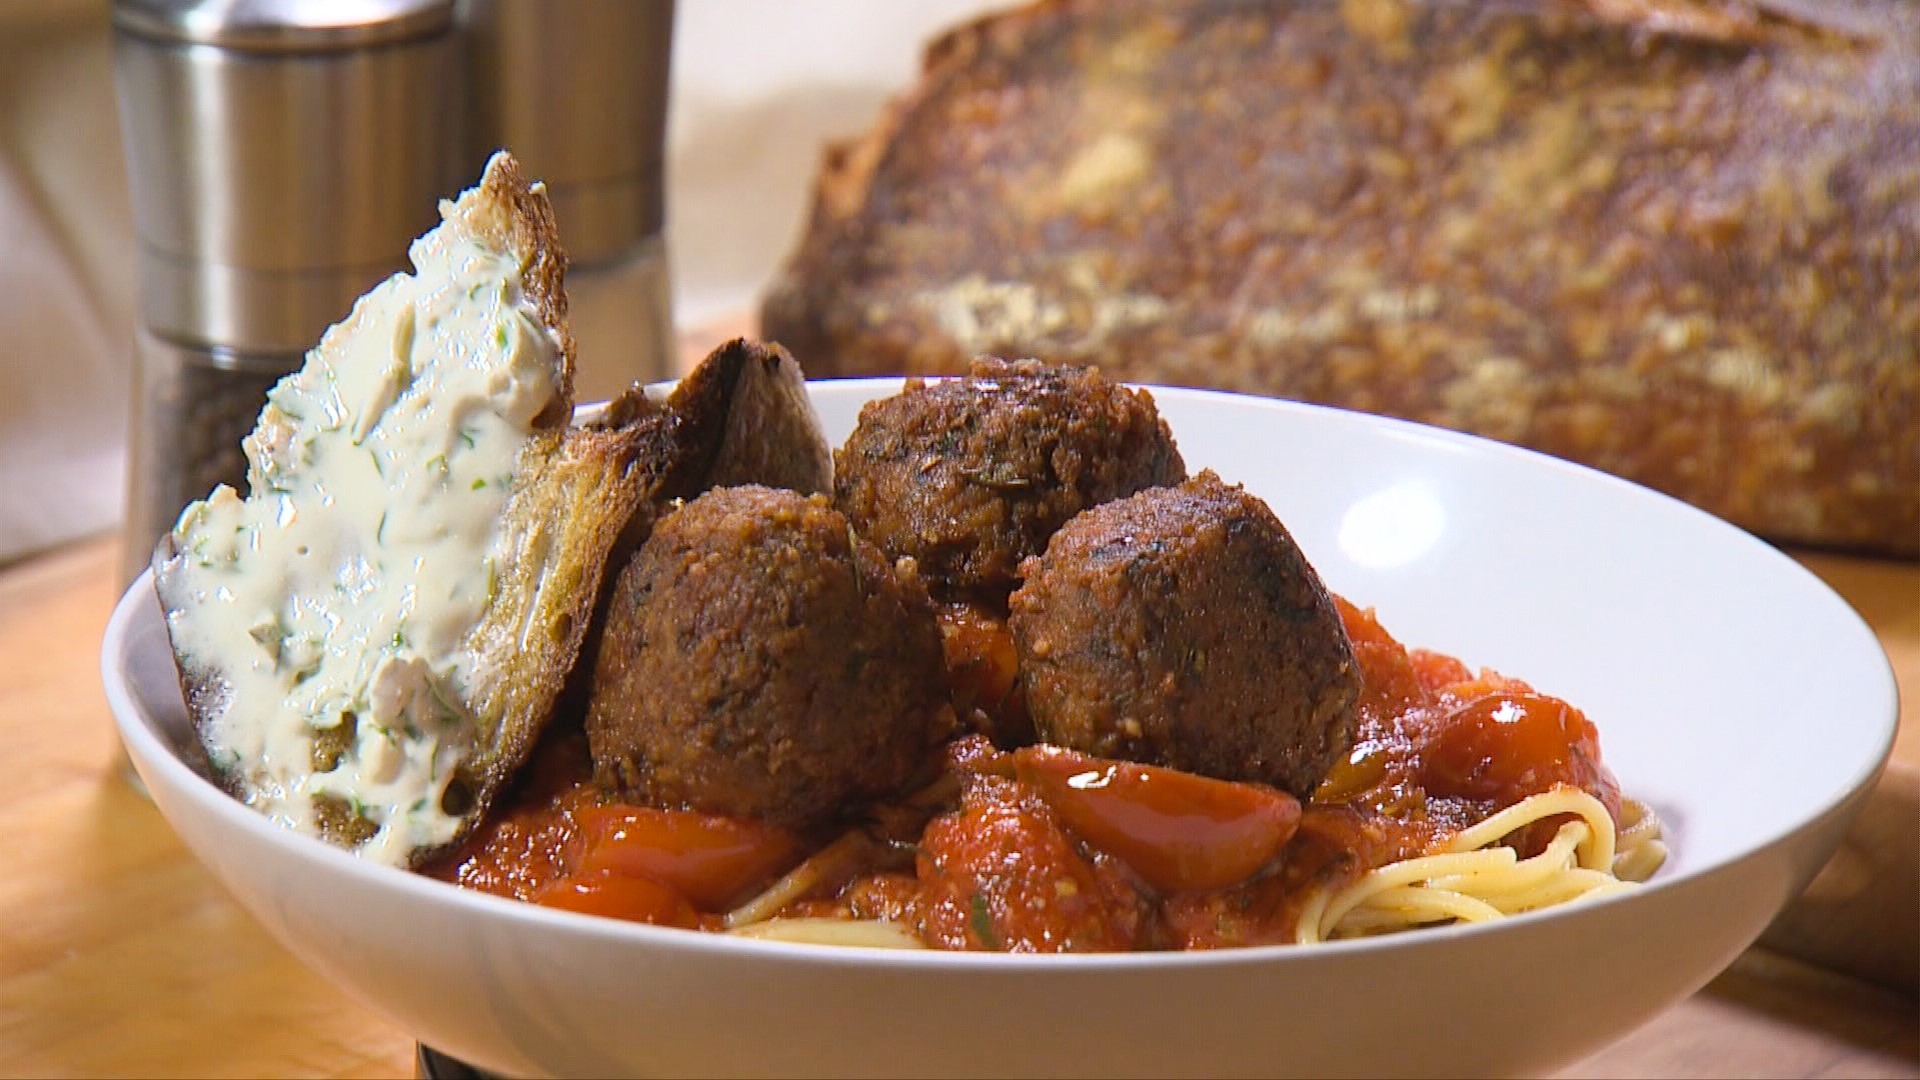 Chef Makini Howell of Plum Bistro is back with her meatless take on a classic supper staple